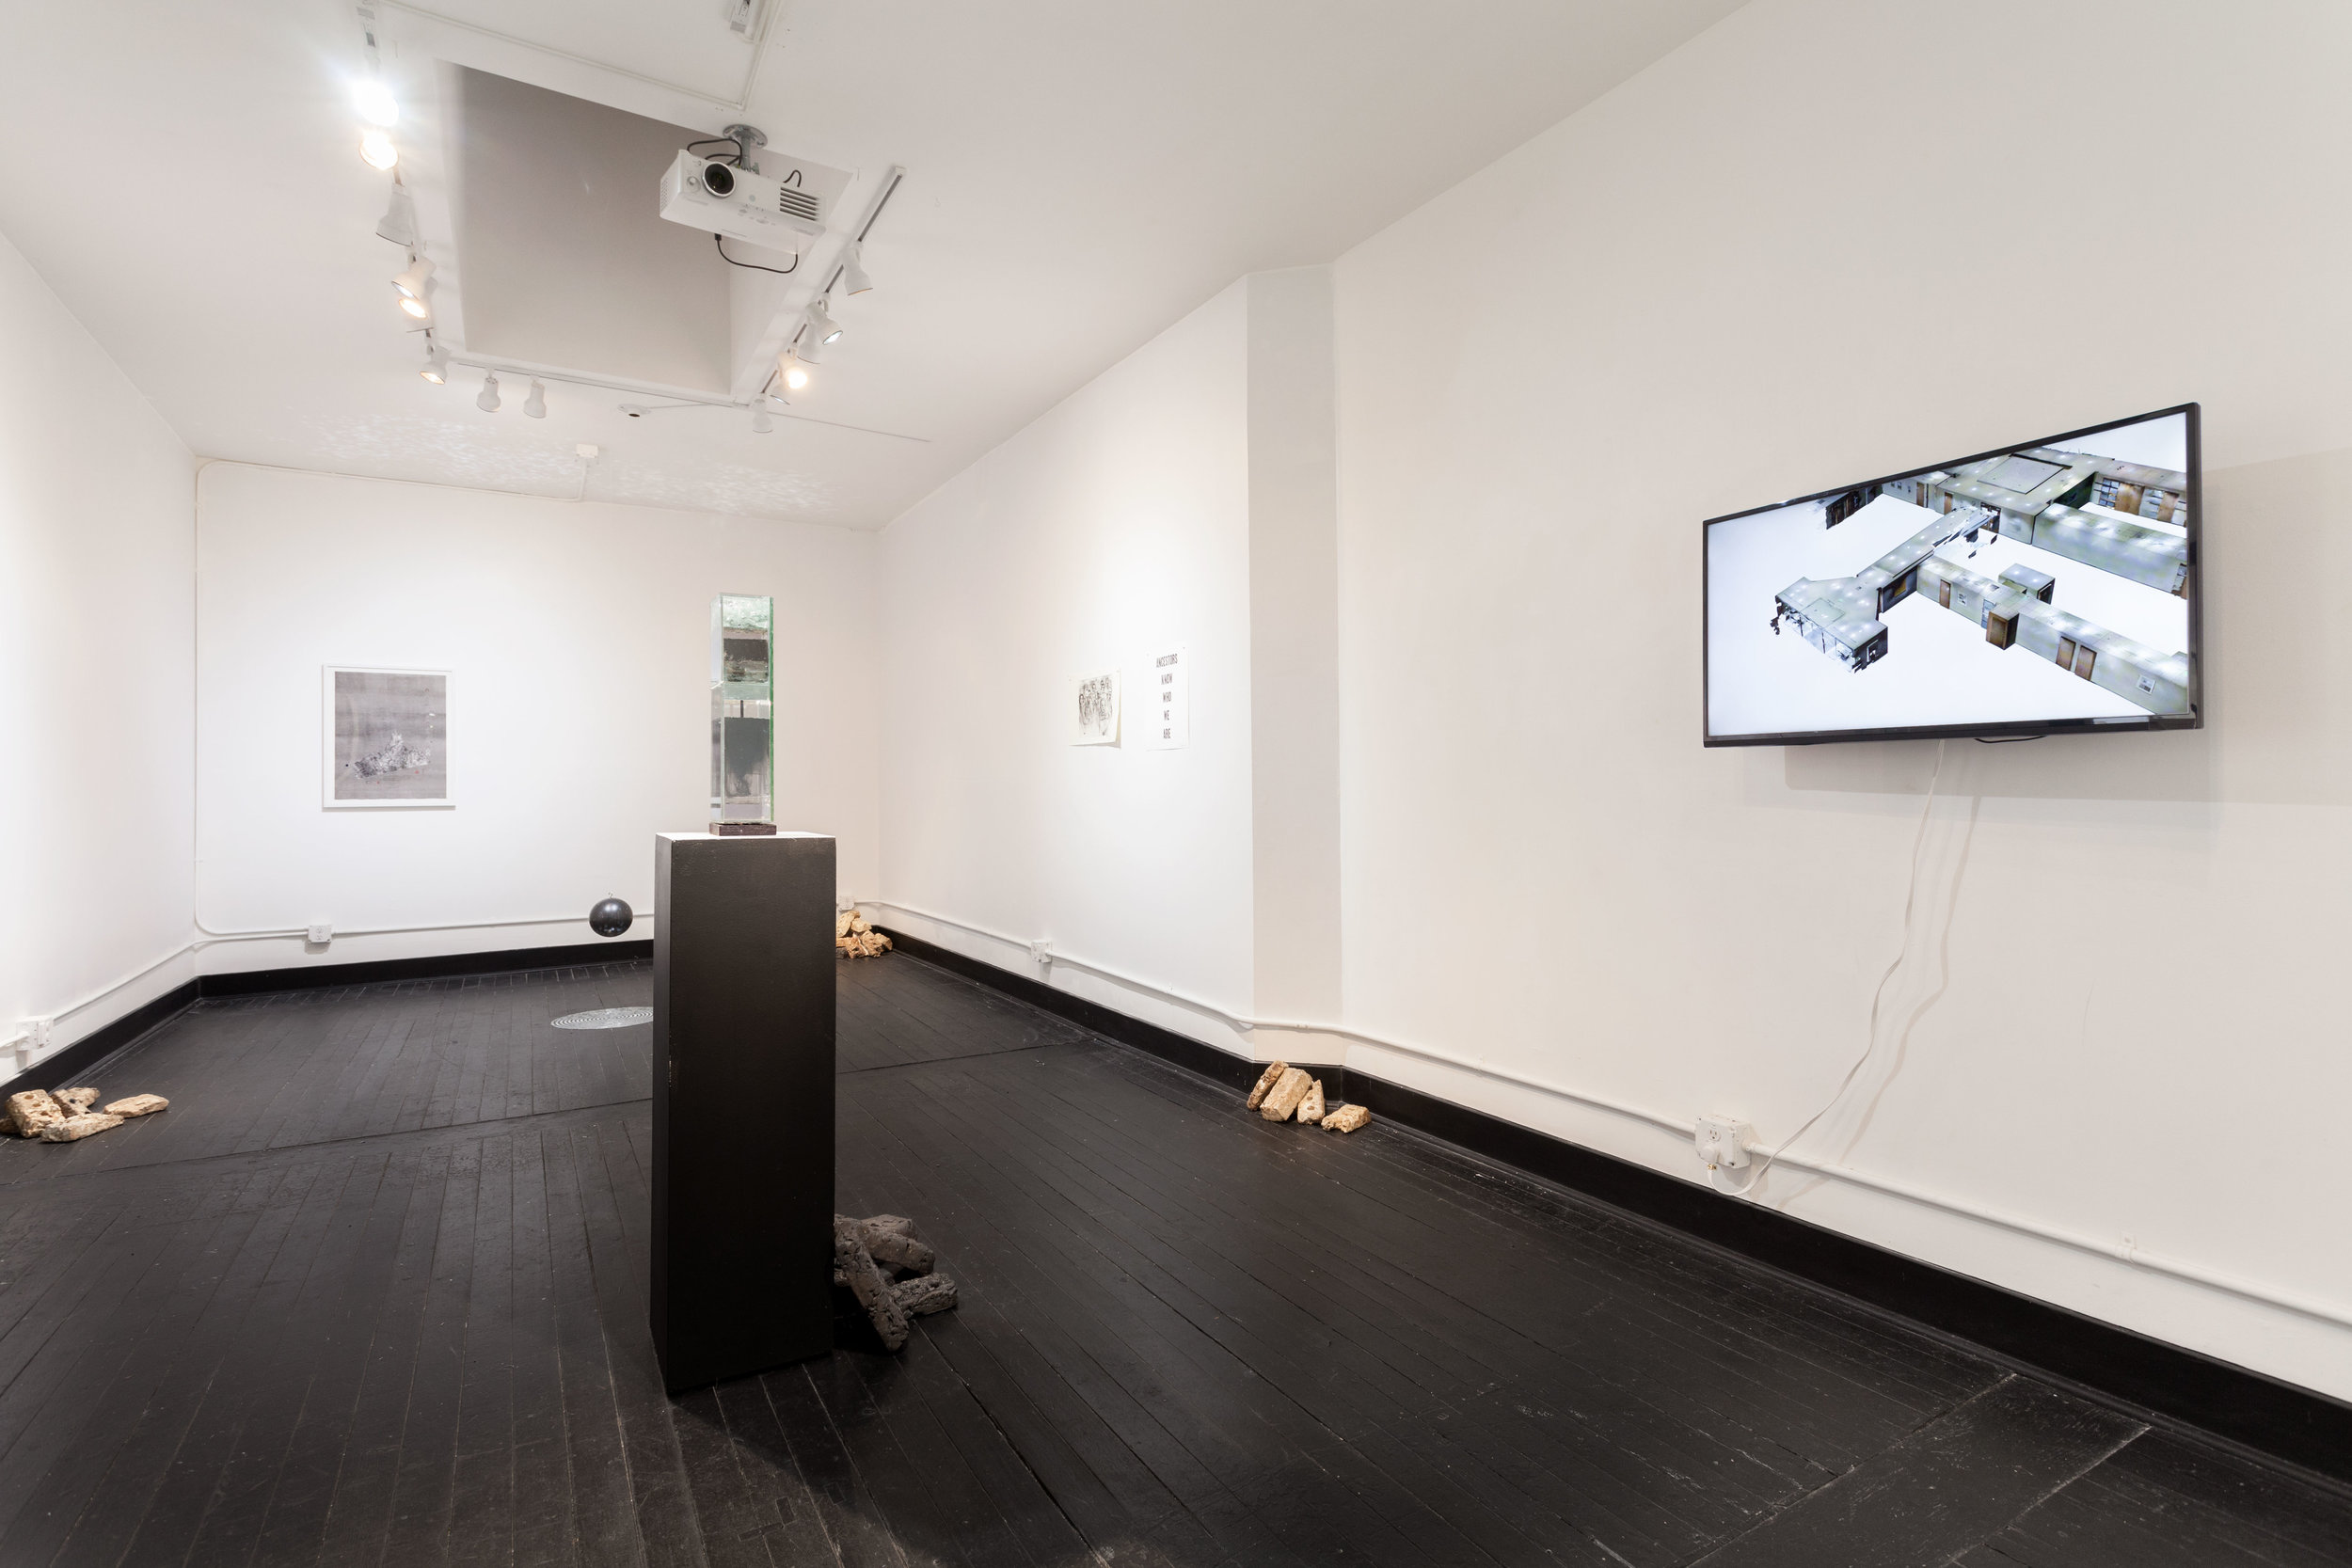 Installation view of "echo, echo," the Alice Gallery, February, 2017